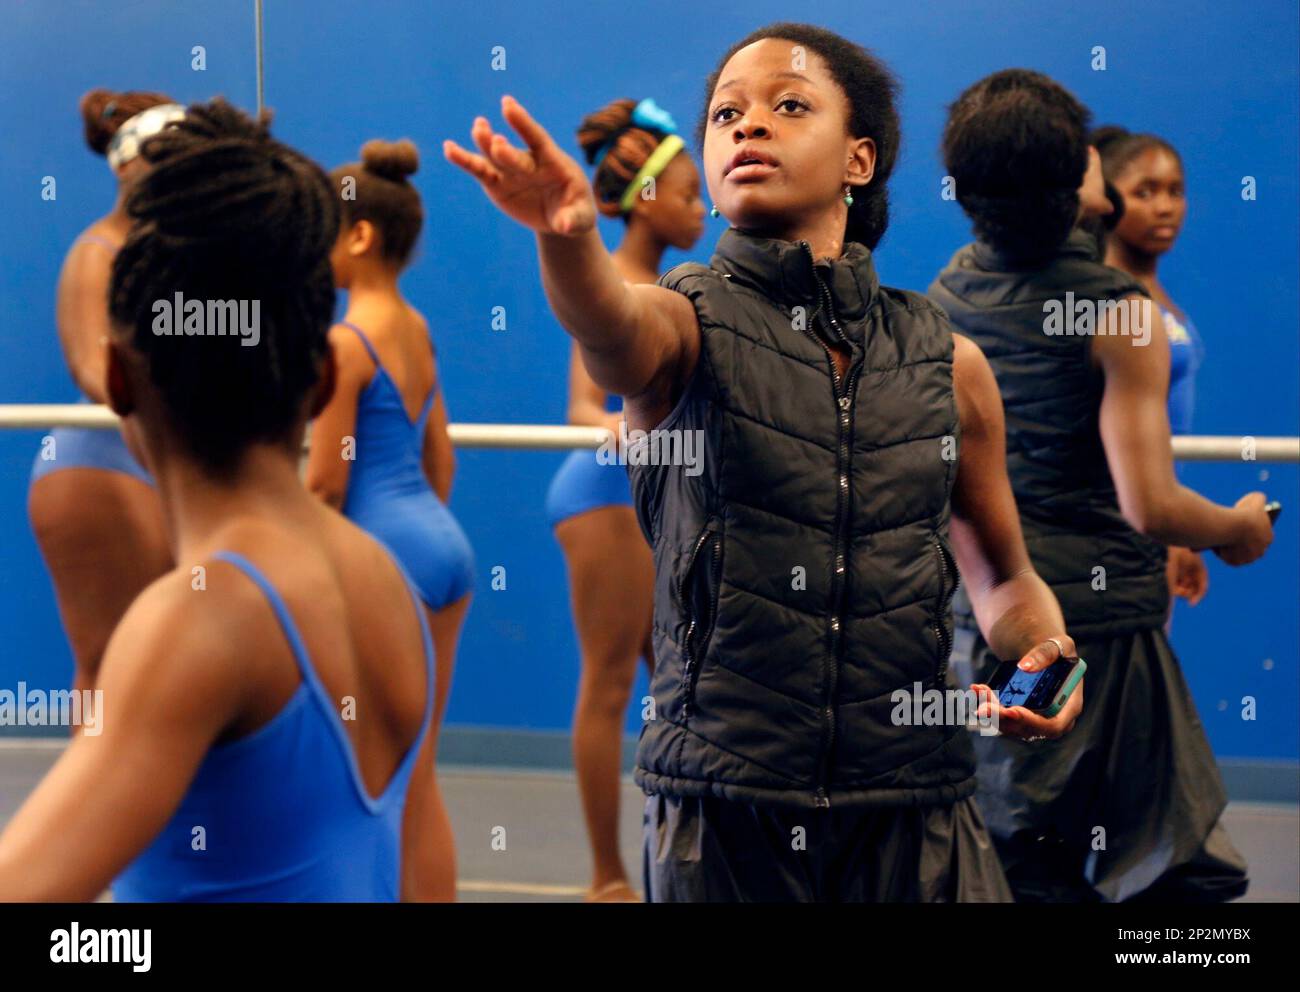 Michaela Deprince Center Whose Extraordinary Trajectory From Sierra Leone War Orphan To